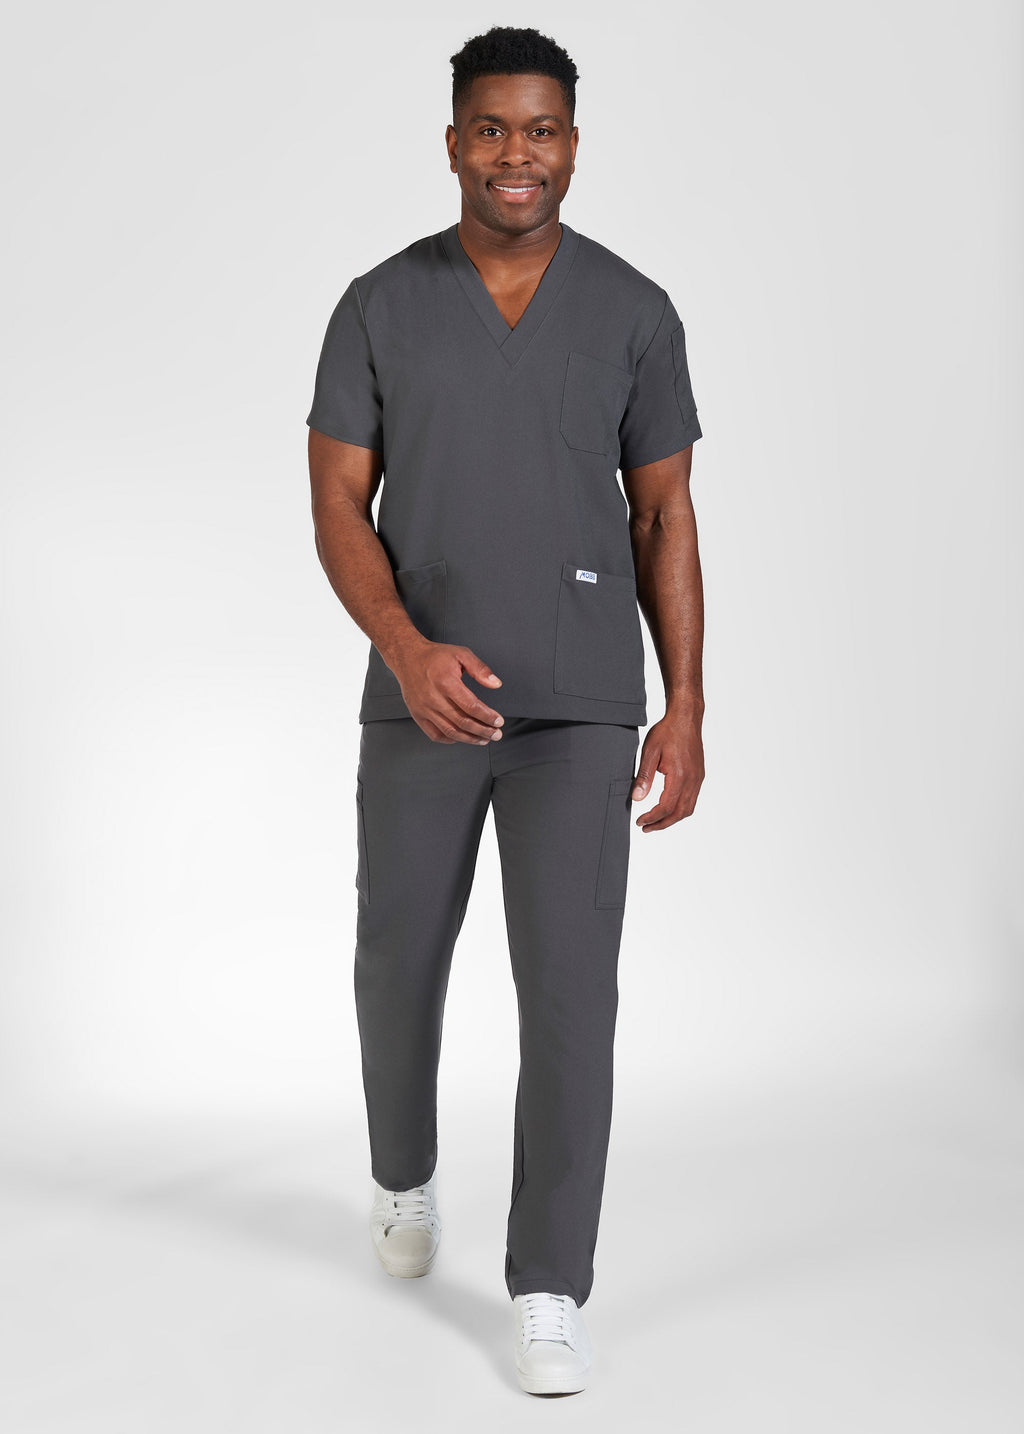 Product - MOBB Clearance The Jesse Scrub Pant